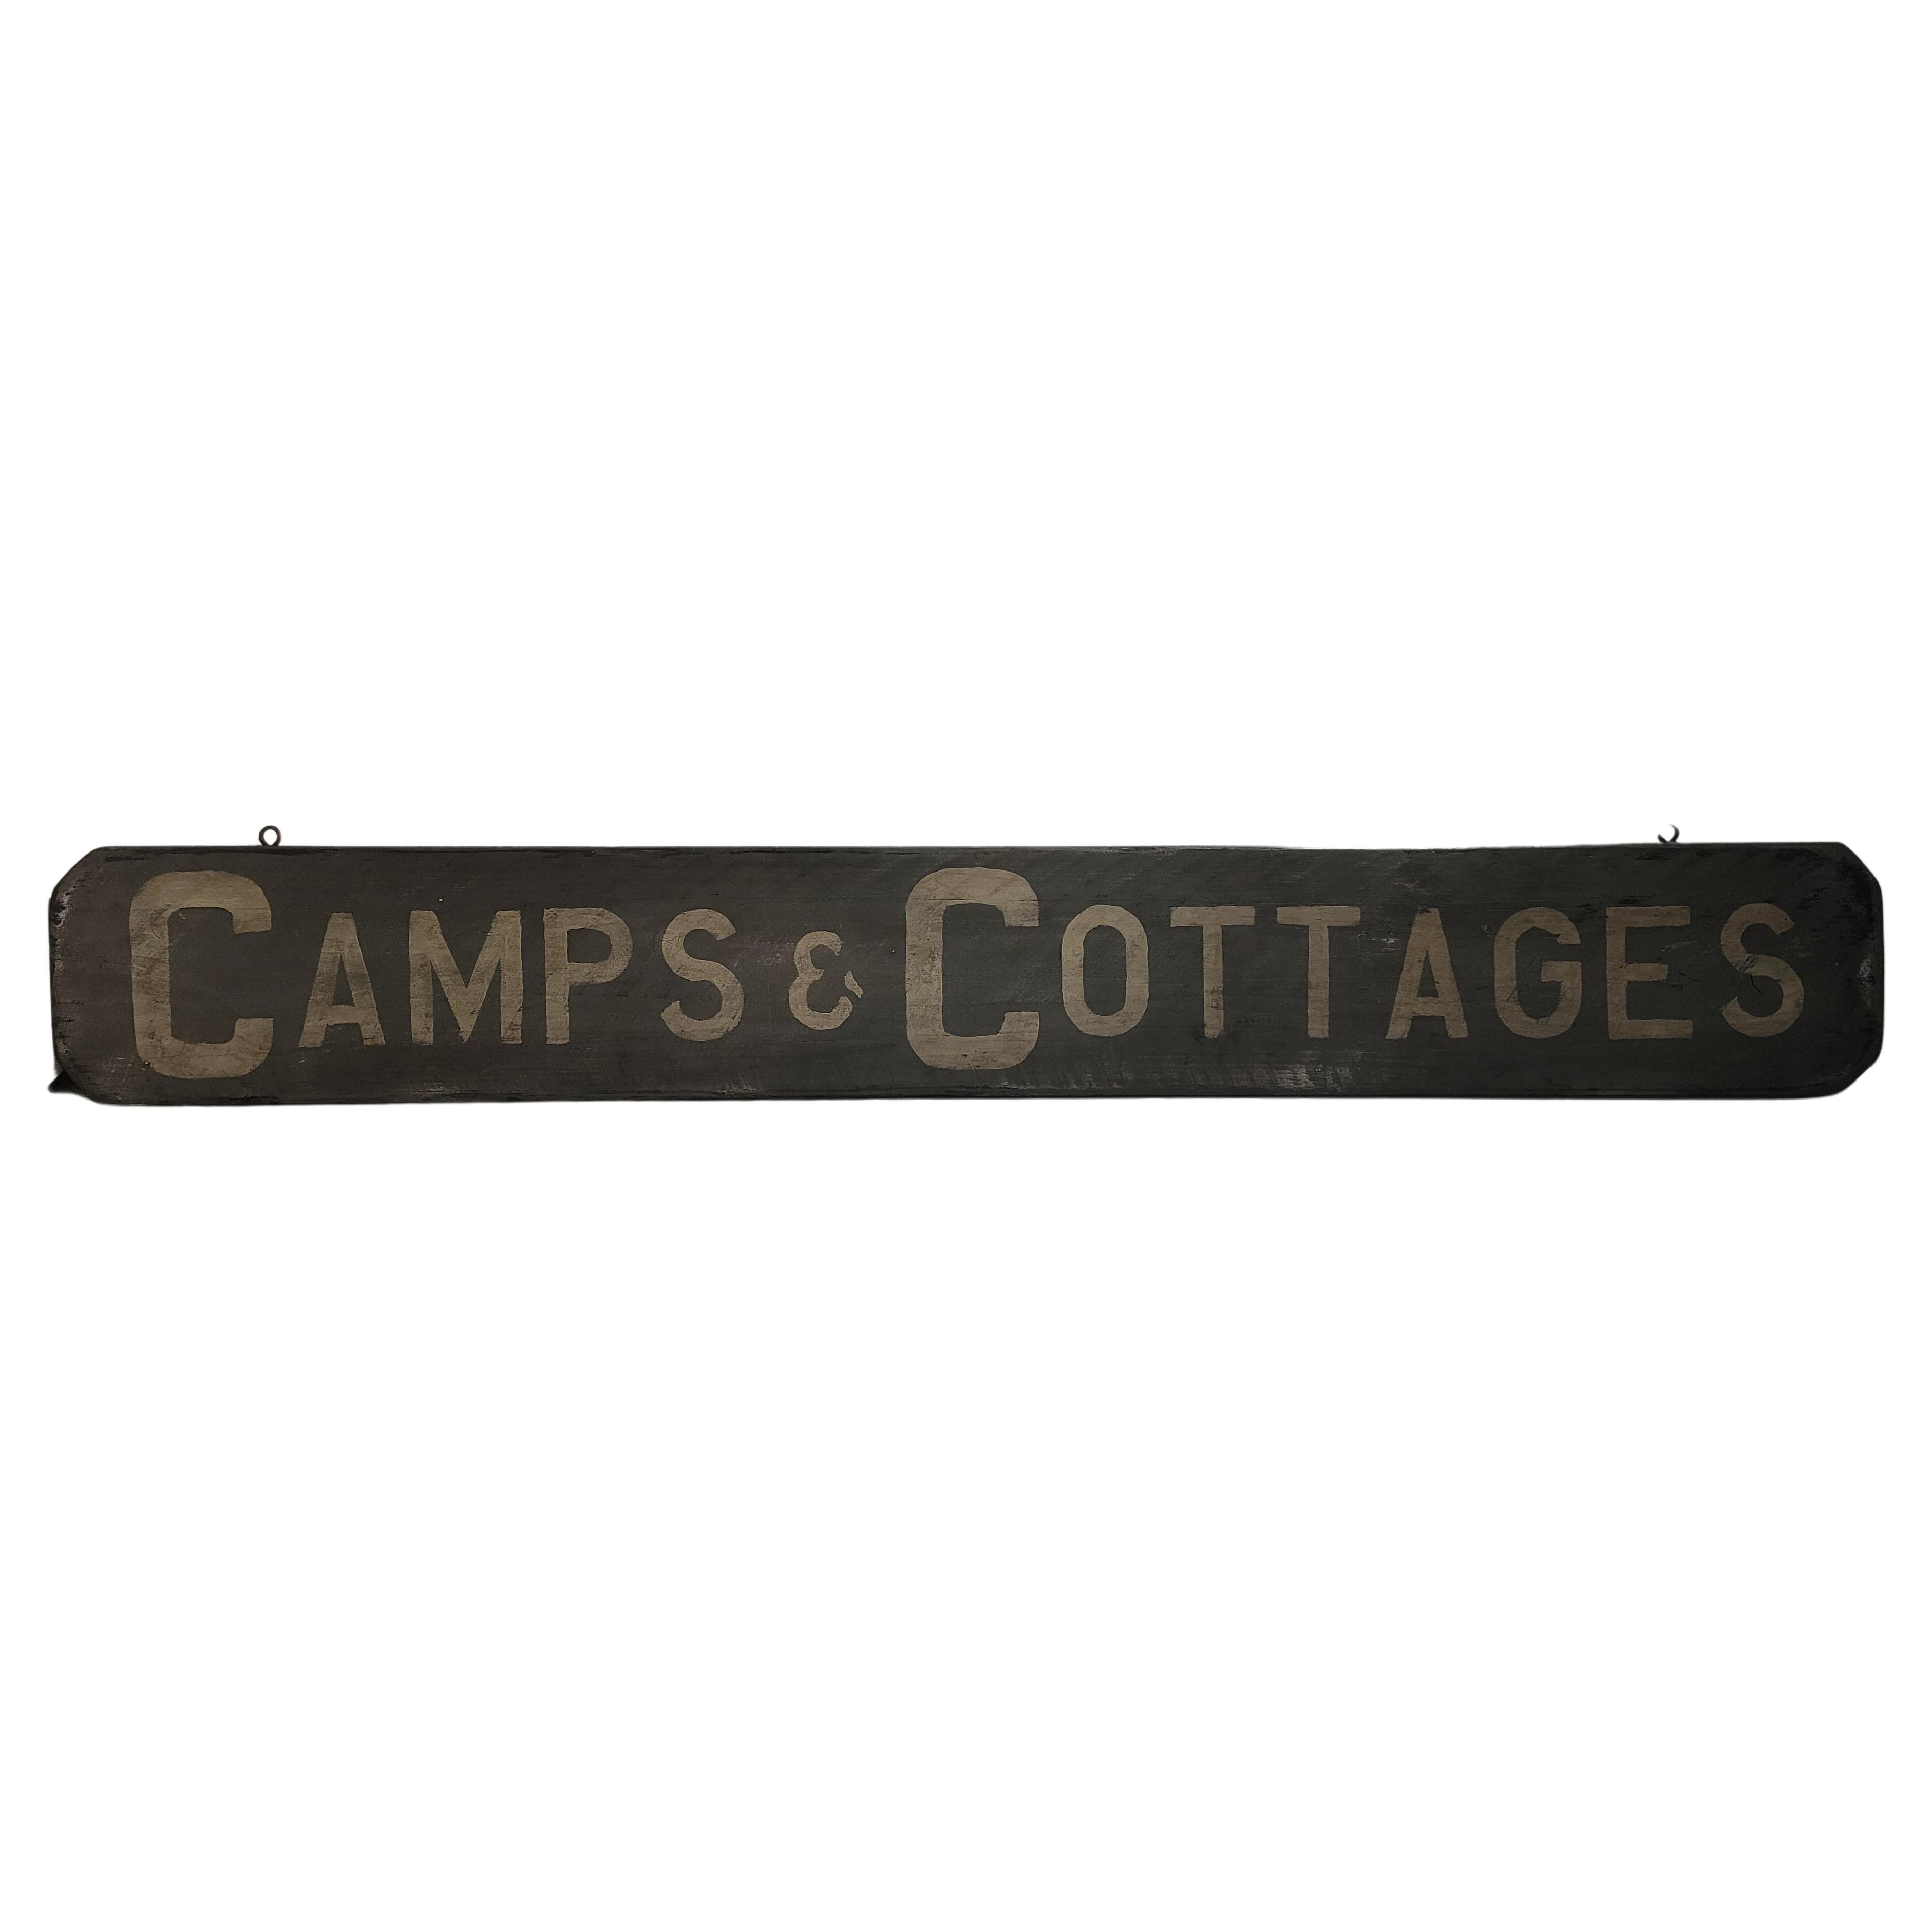 Camps & Cottages Trade Sign